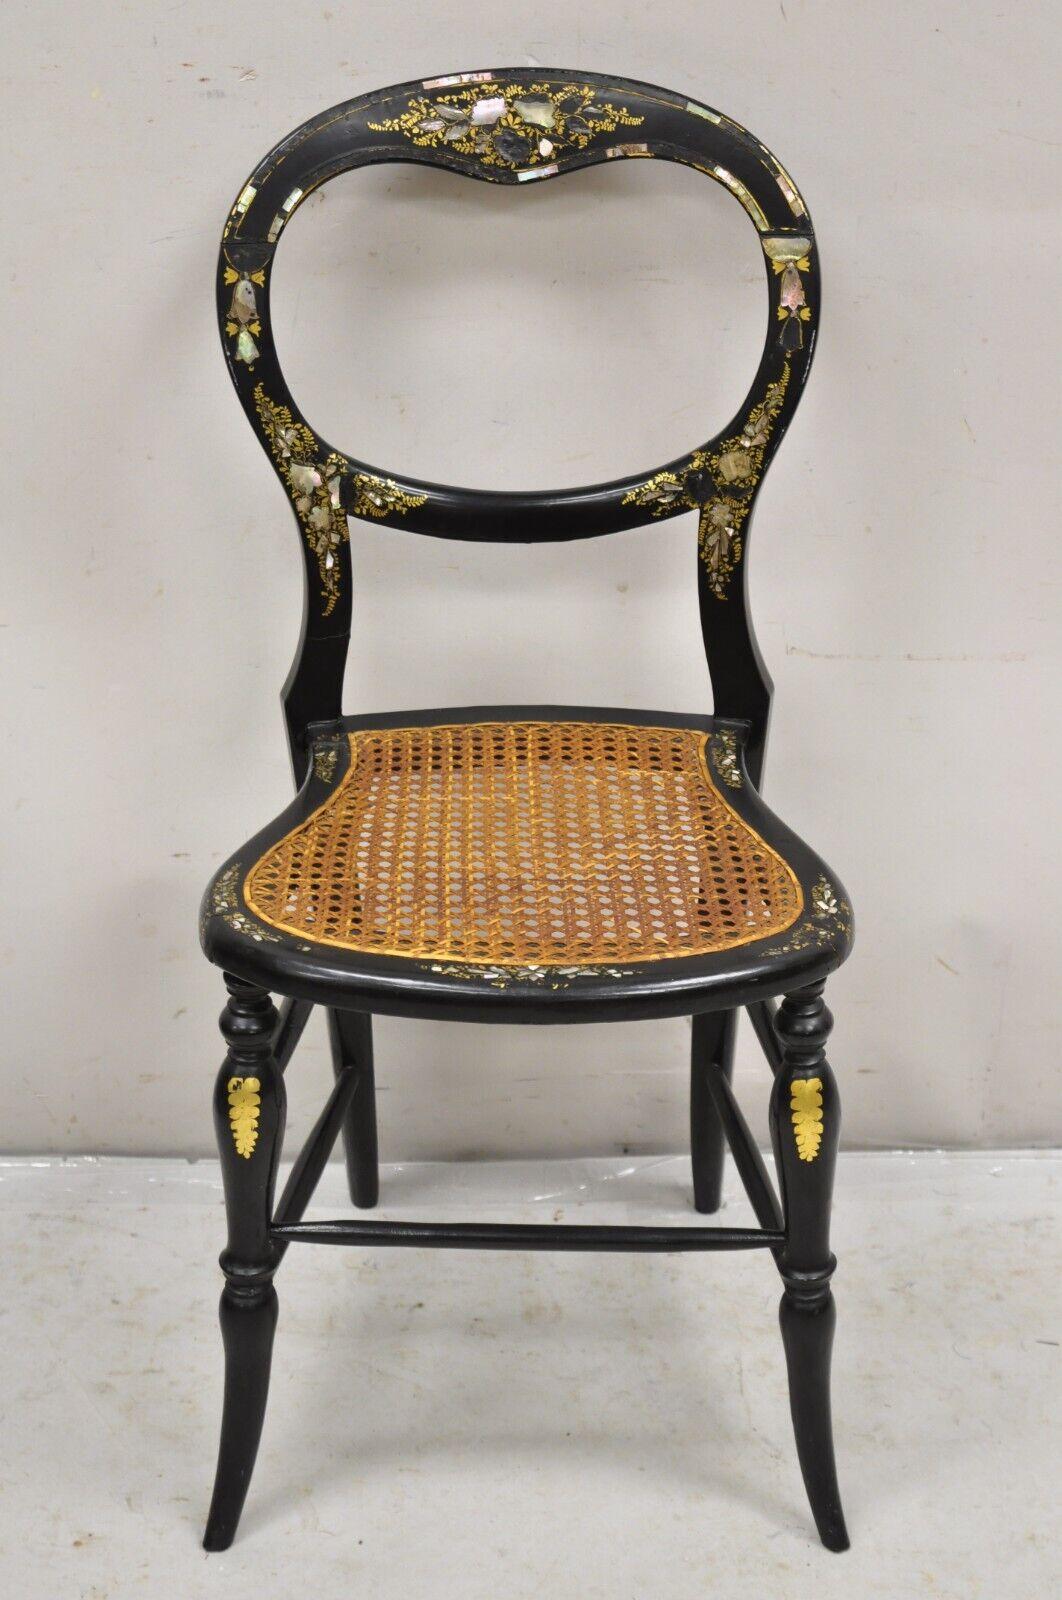 Antique Victorian Mother of Pearl Inlay Black Ebonized Regency Cane Seat Side Chair. Circa Early 1800s. Measurements: 32